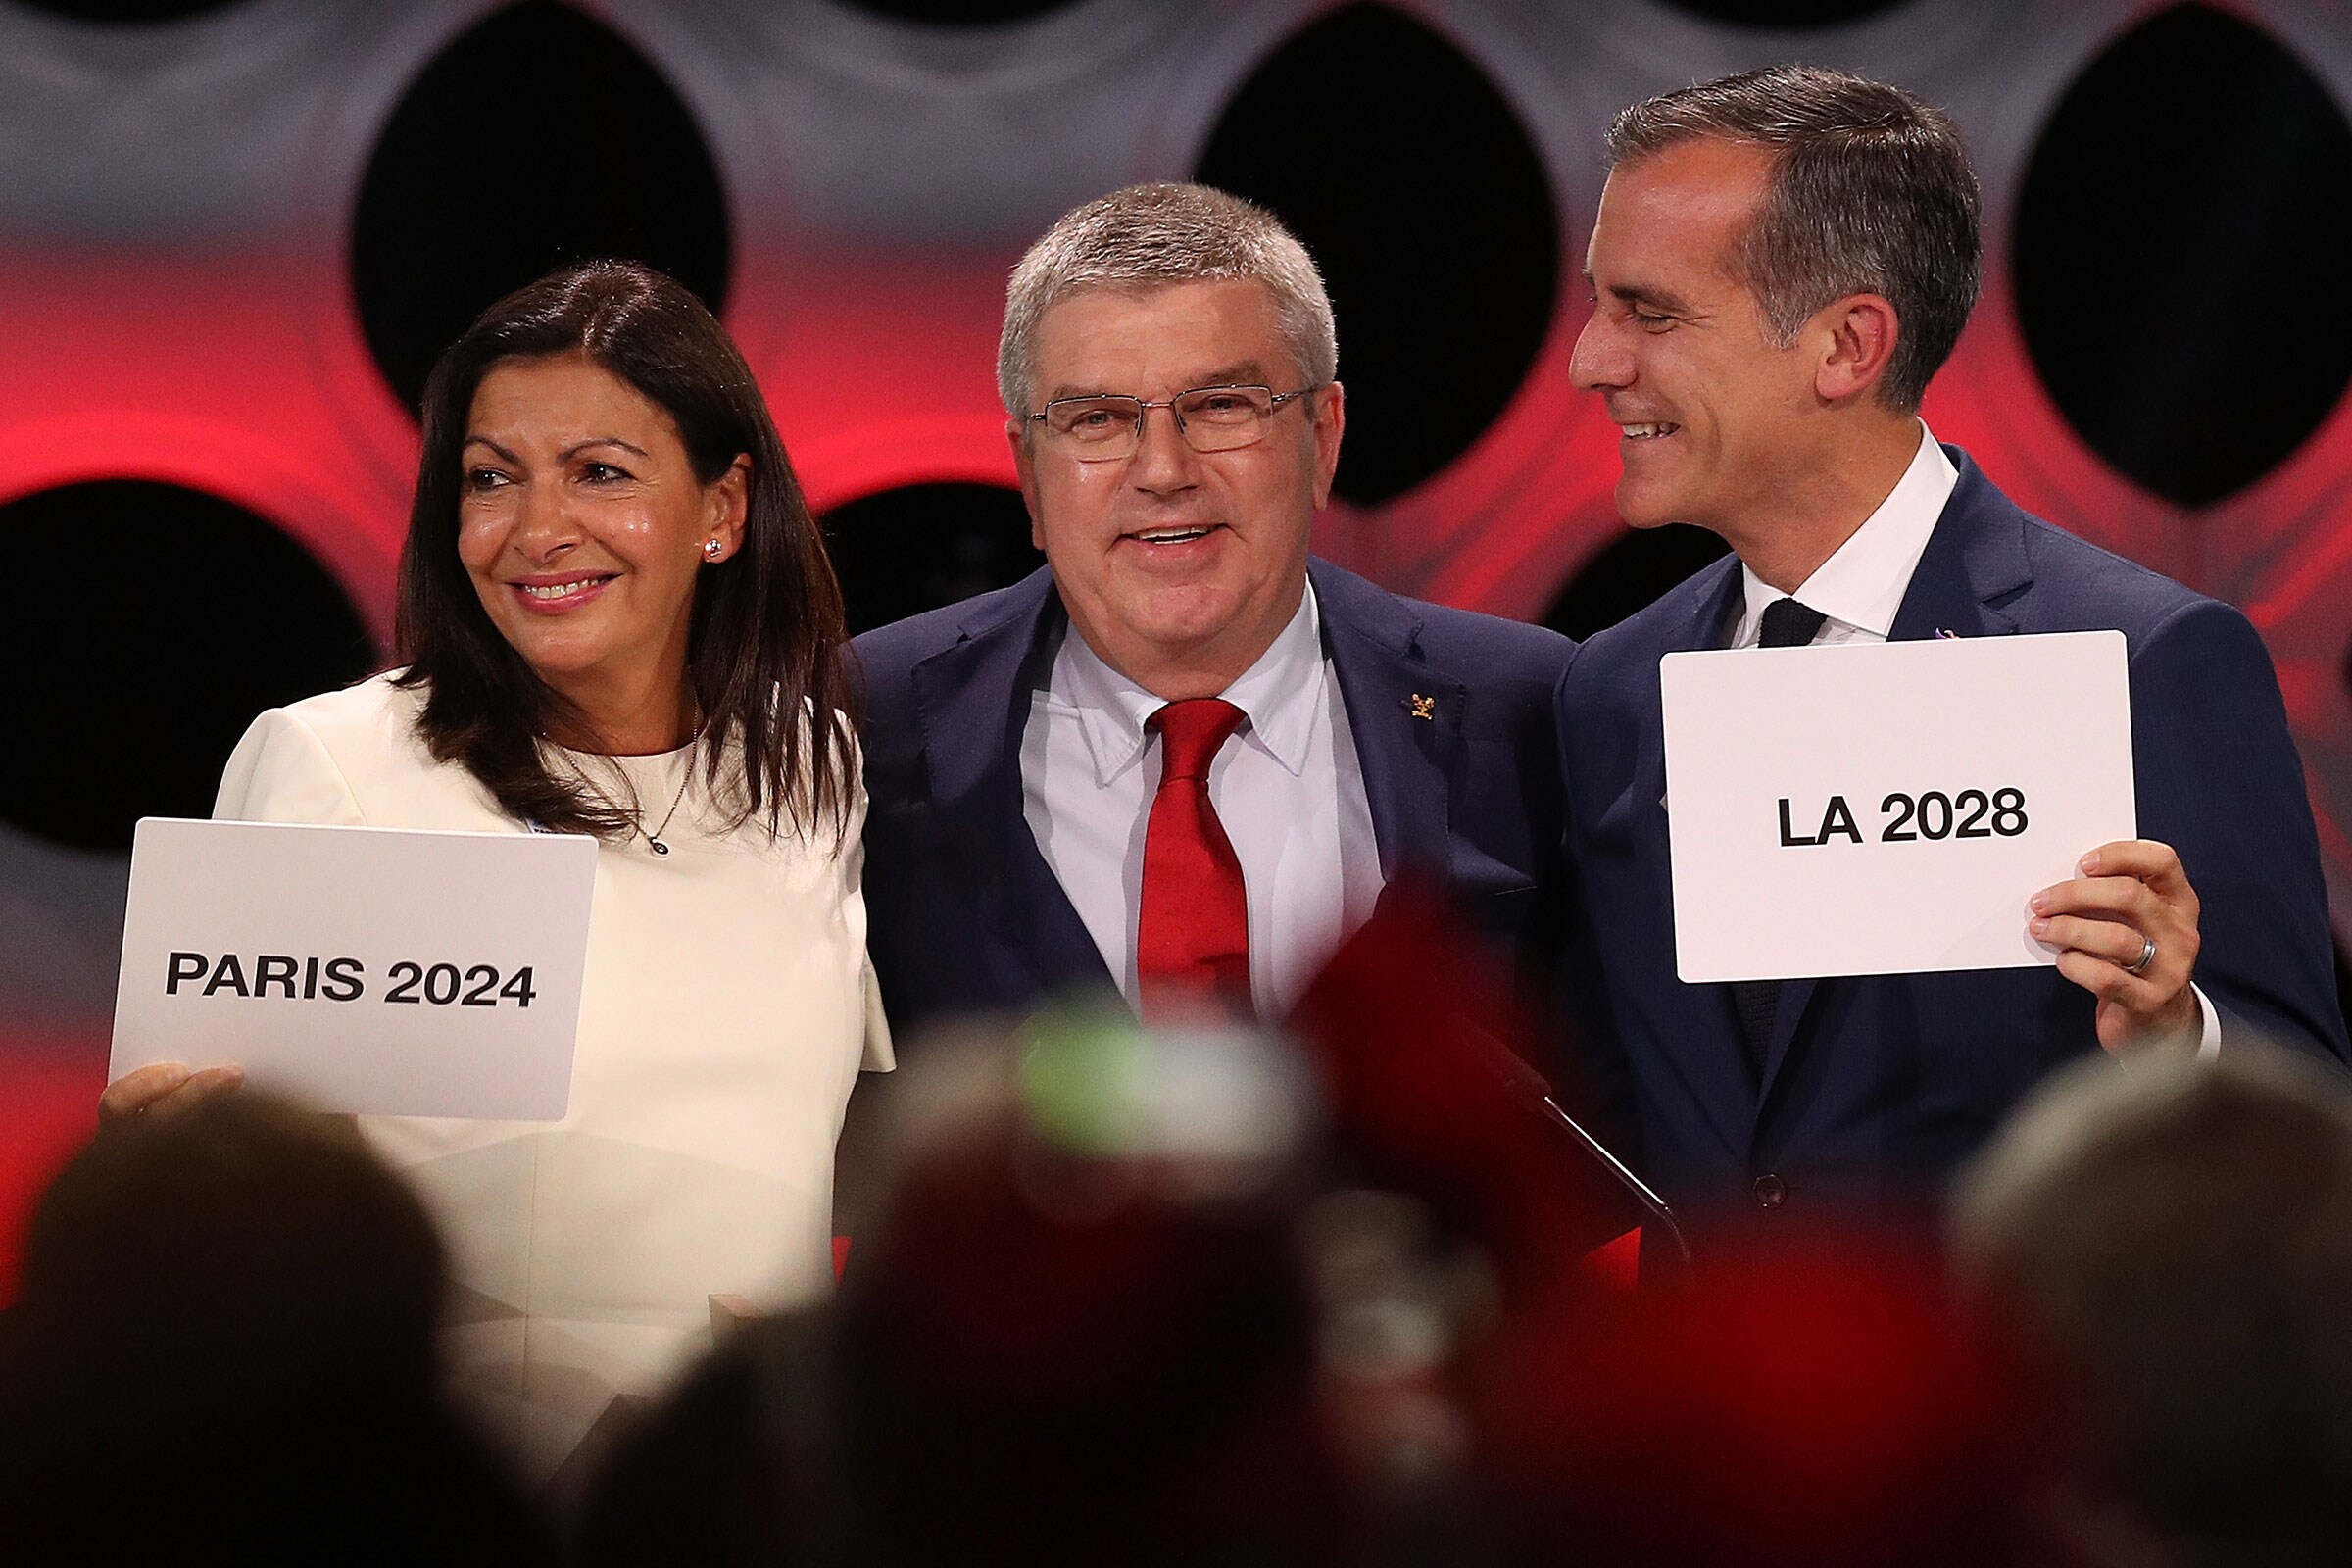 IOC President Thomas Bach at the election of Paris 2024 and LA 2028 as Host cities.